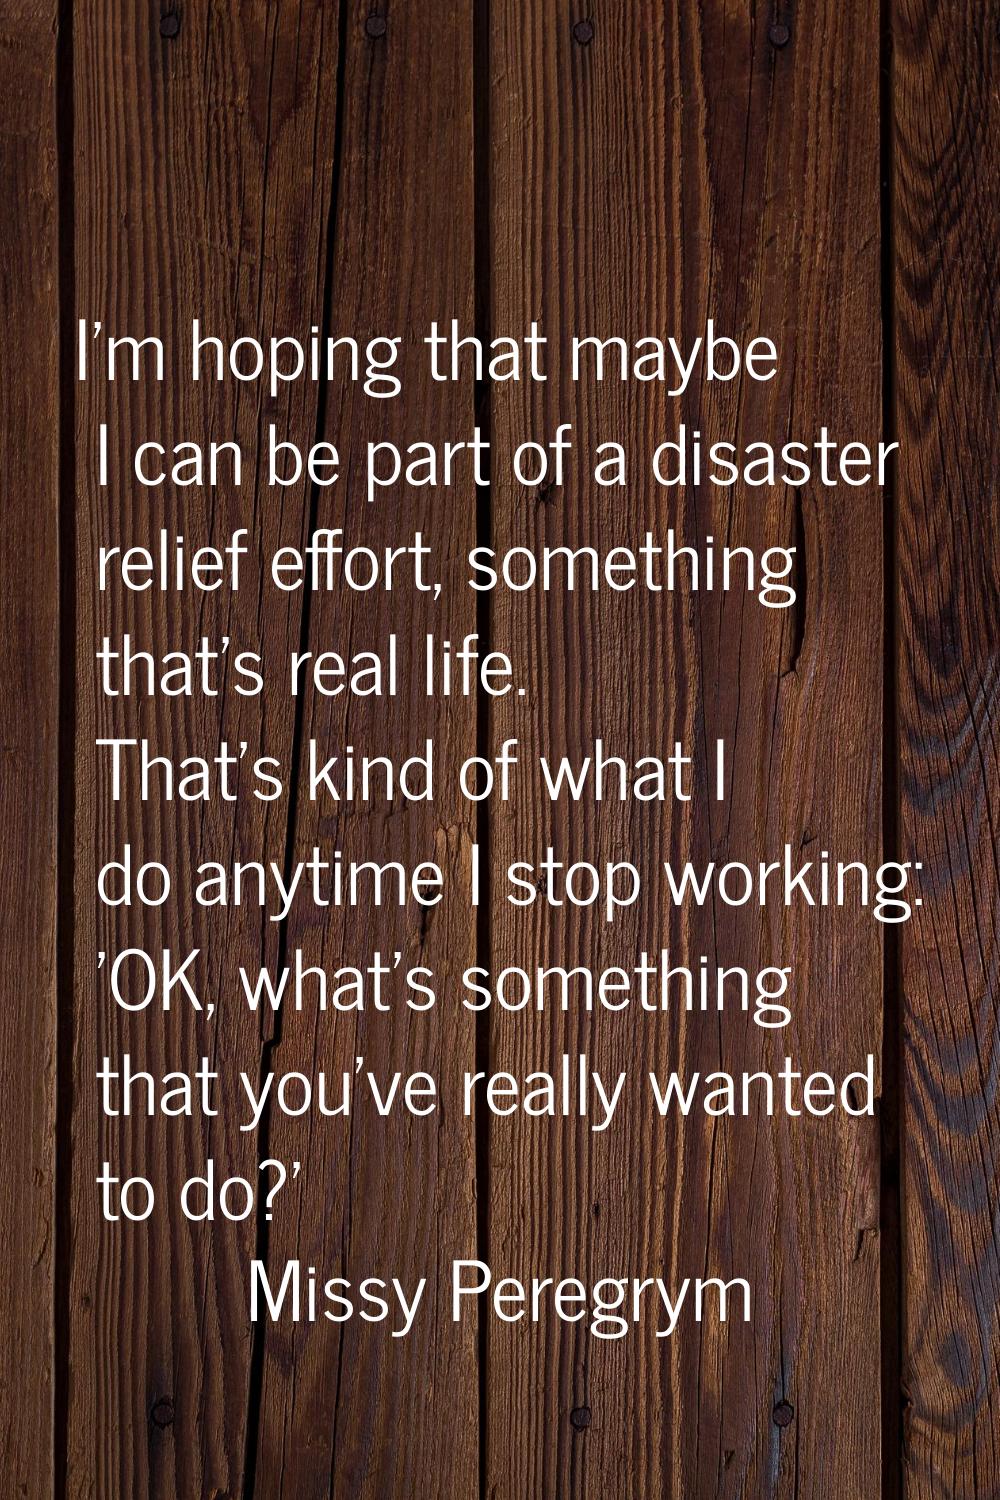 I'm hoping that maybe I can be part of a disaster relief effort, something that's real life. That's